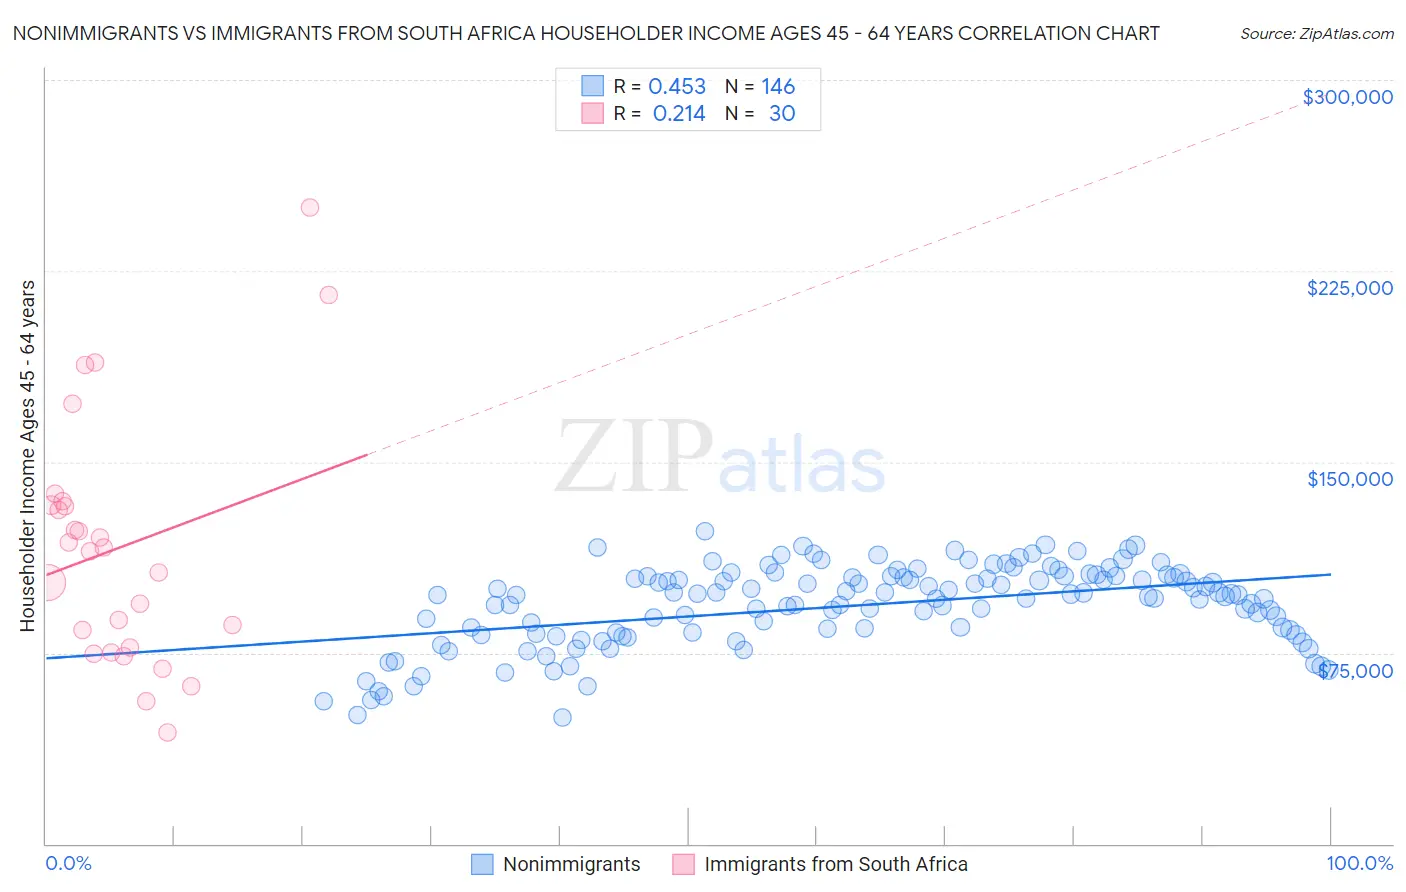 Nonimmigrants vs Immigrants from South Africa Householder Income Ages 45 - 64 years